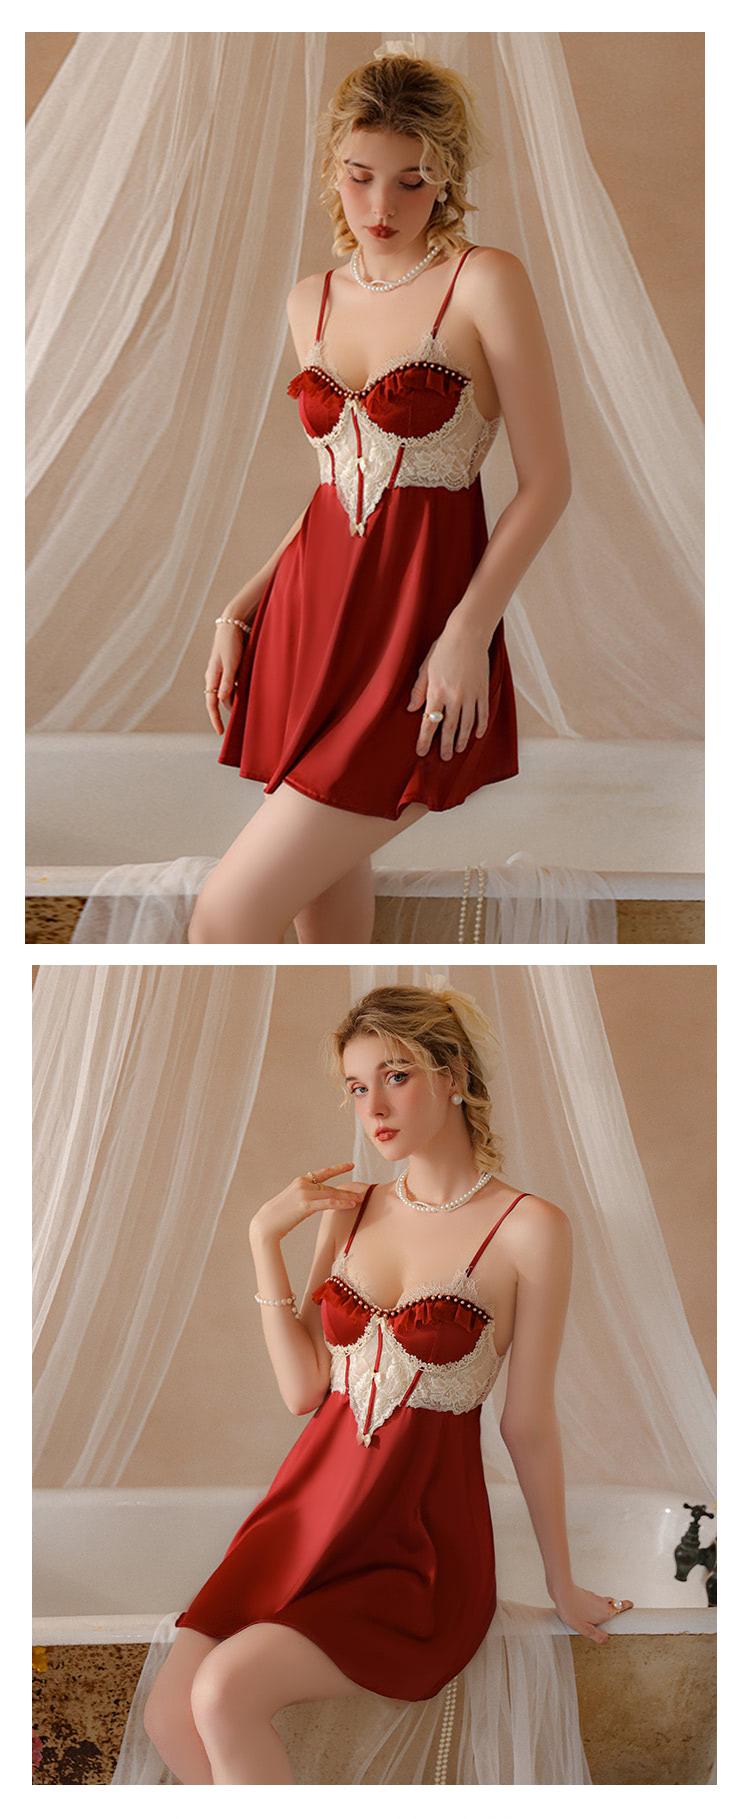 Low-Cut-V-neck-Red-Lace-Open-Back-Slip-Nightgown-Chemise-Slip-Dress11